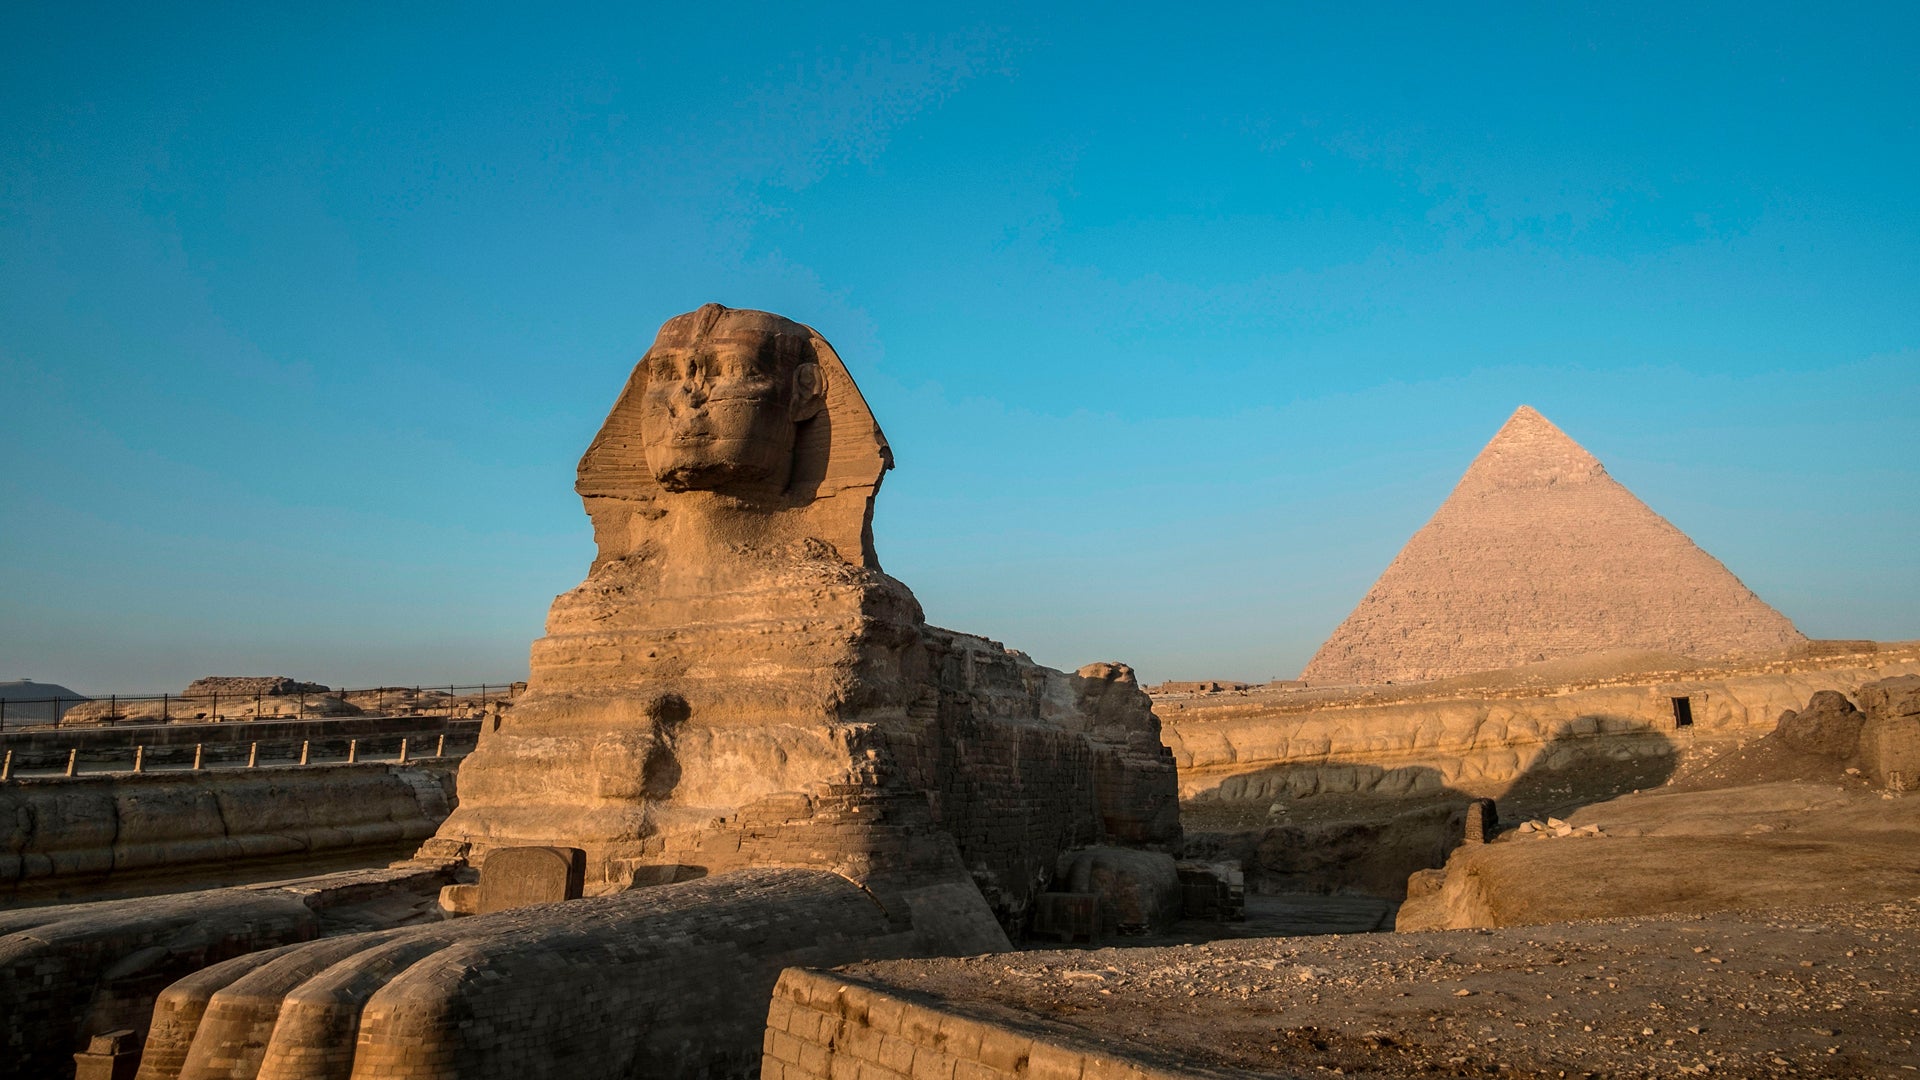 Sphinx in egypt